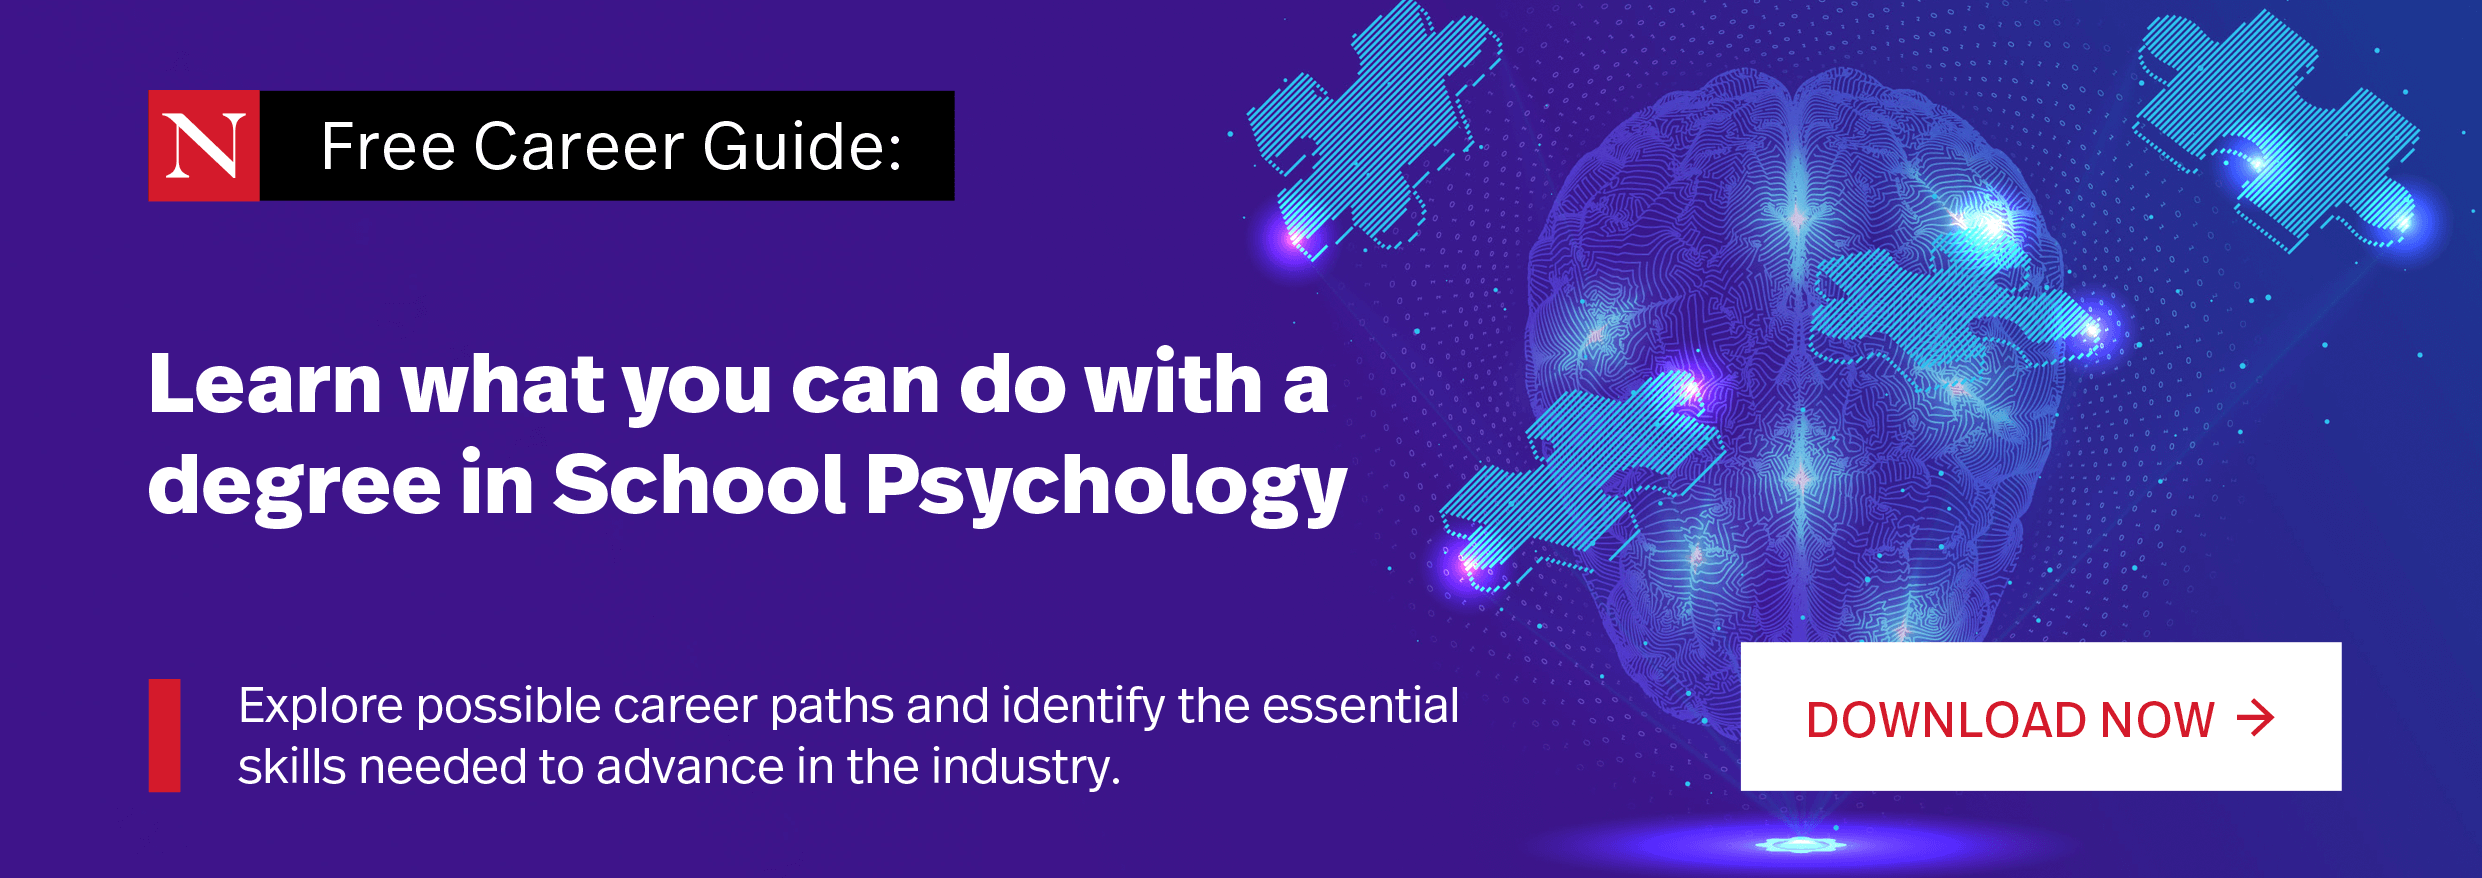 Download Our Free Guide to Advancing Your School Psychology Career“ width=